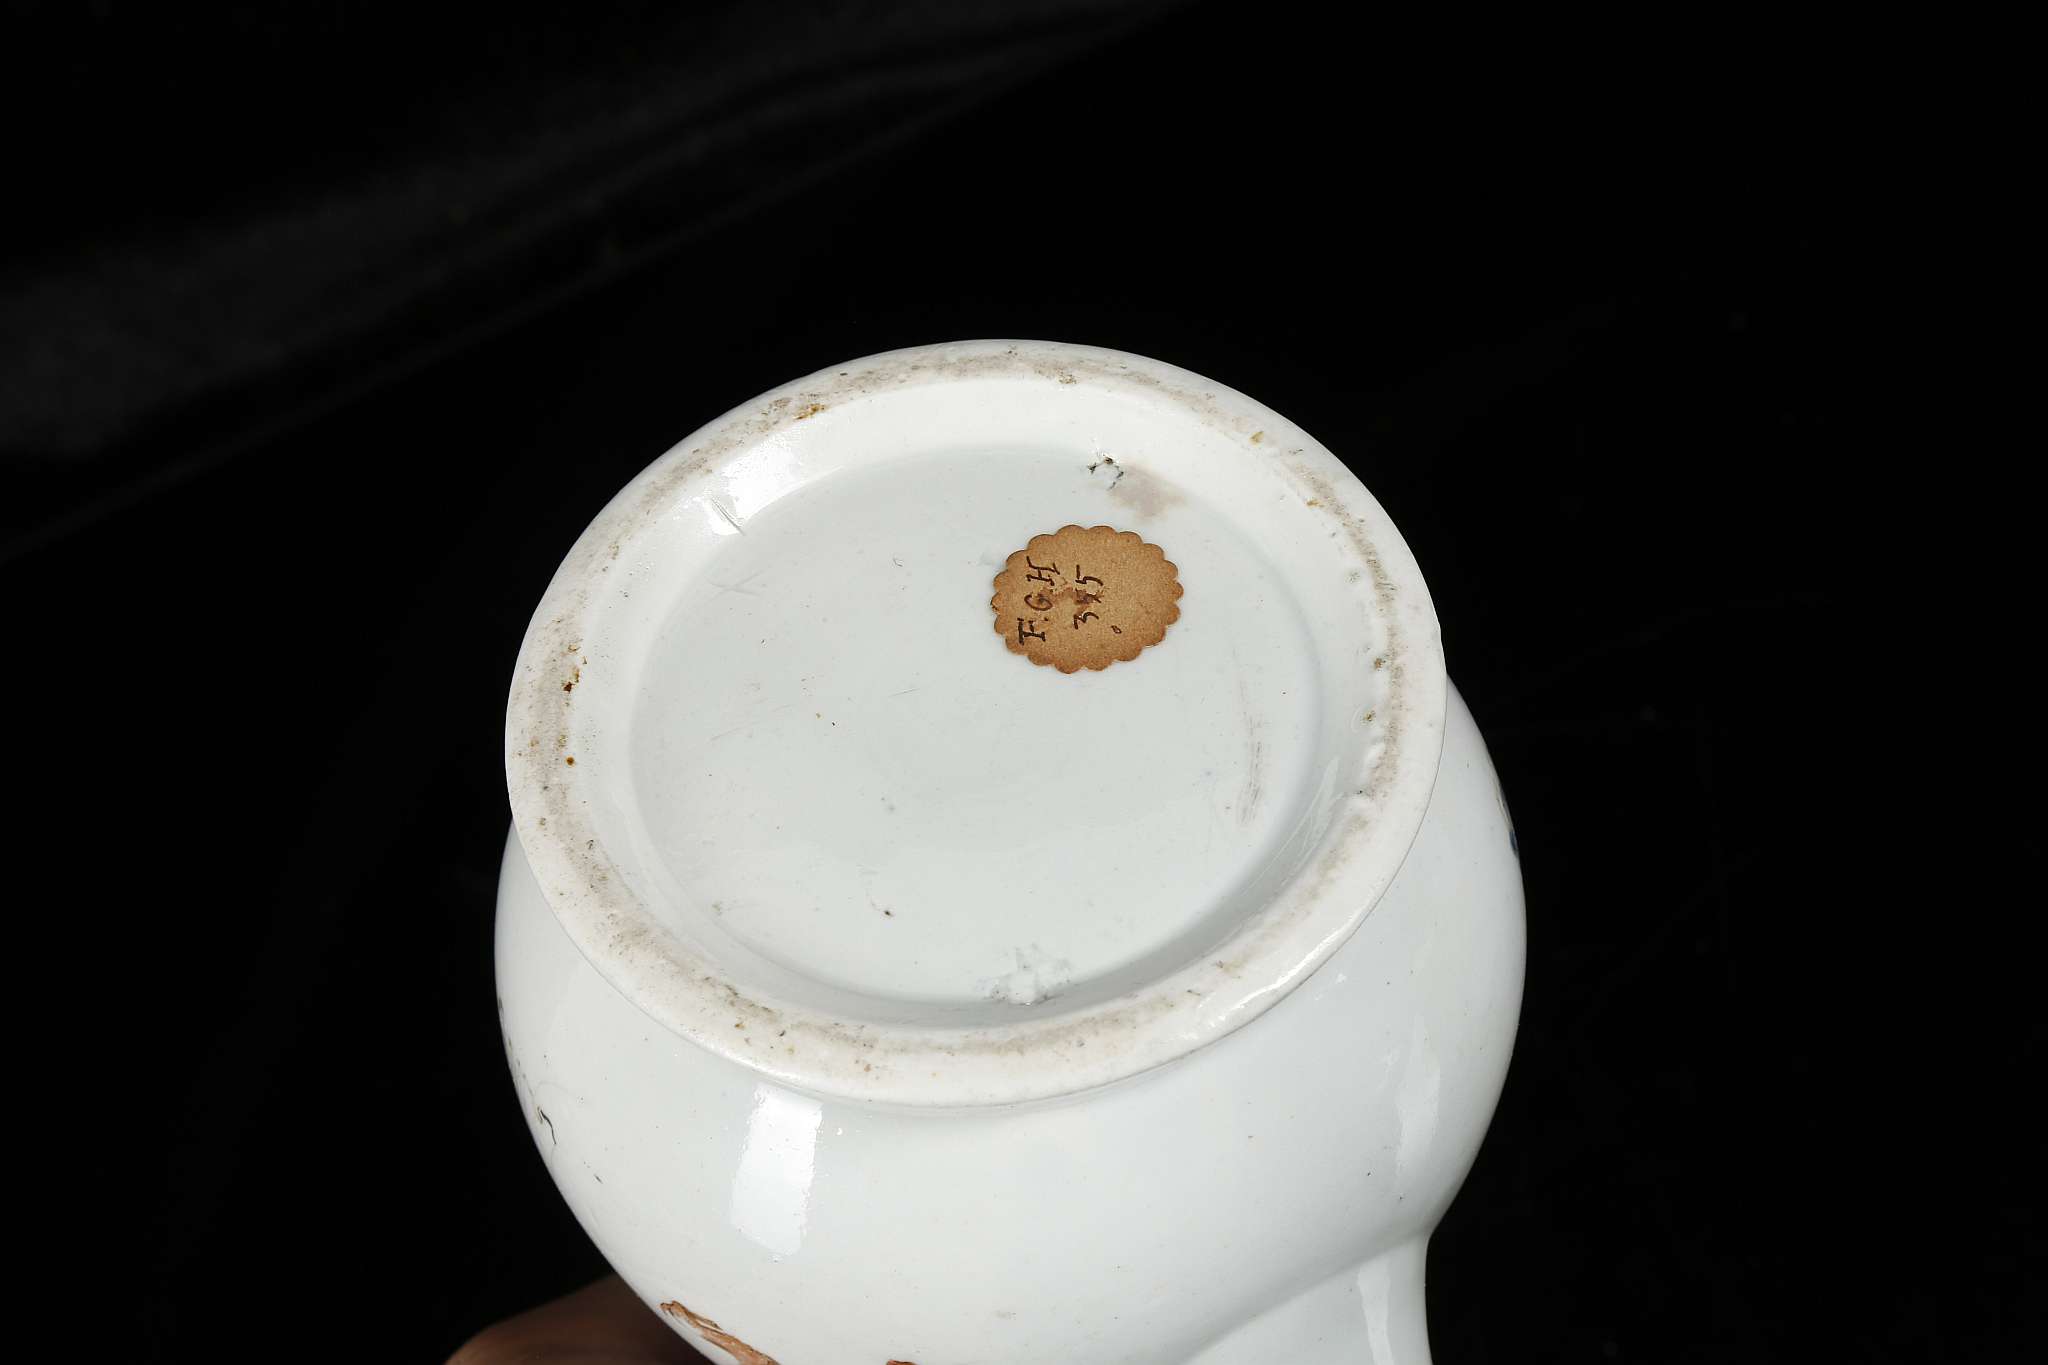 AN EARLY WORCESTER PORCELAIN COFFEE POT, circa 1753, of plain baluster shape on a neatly turned - Image 5 of 5